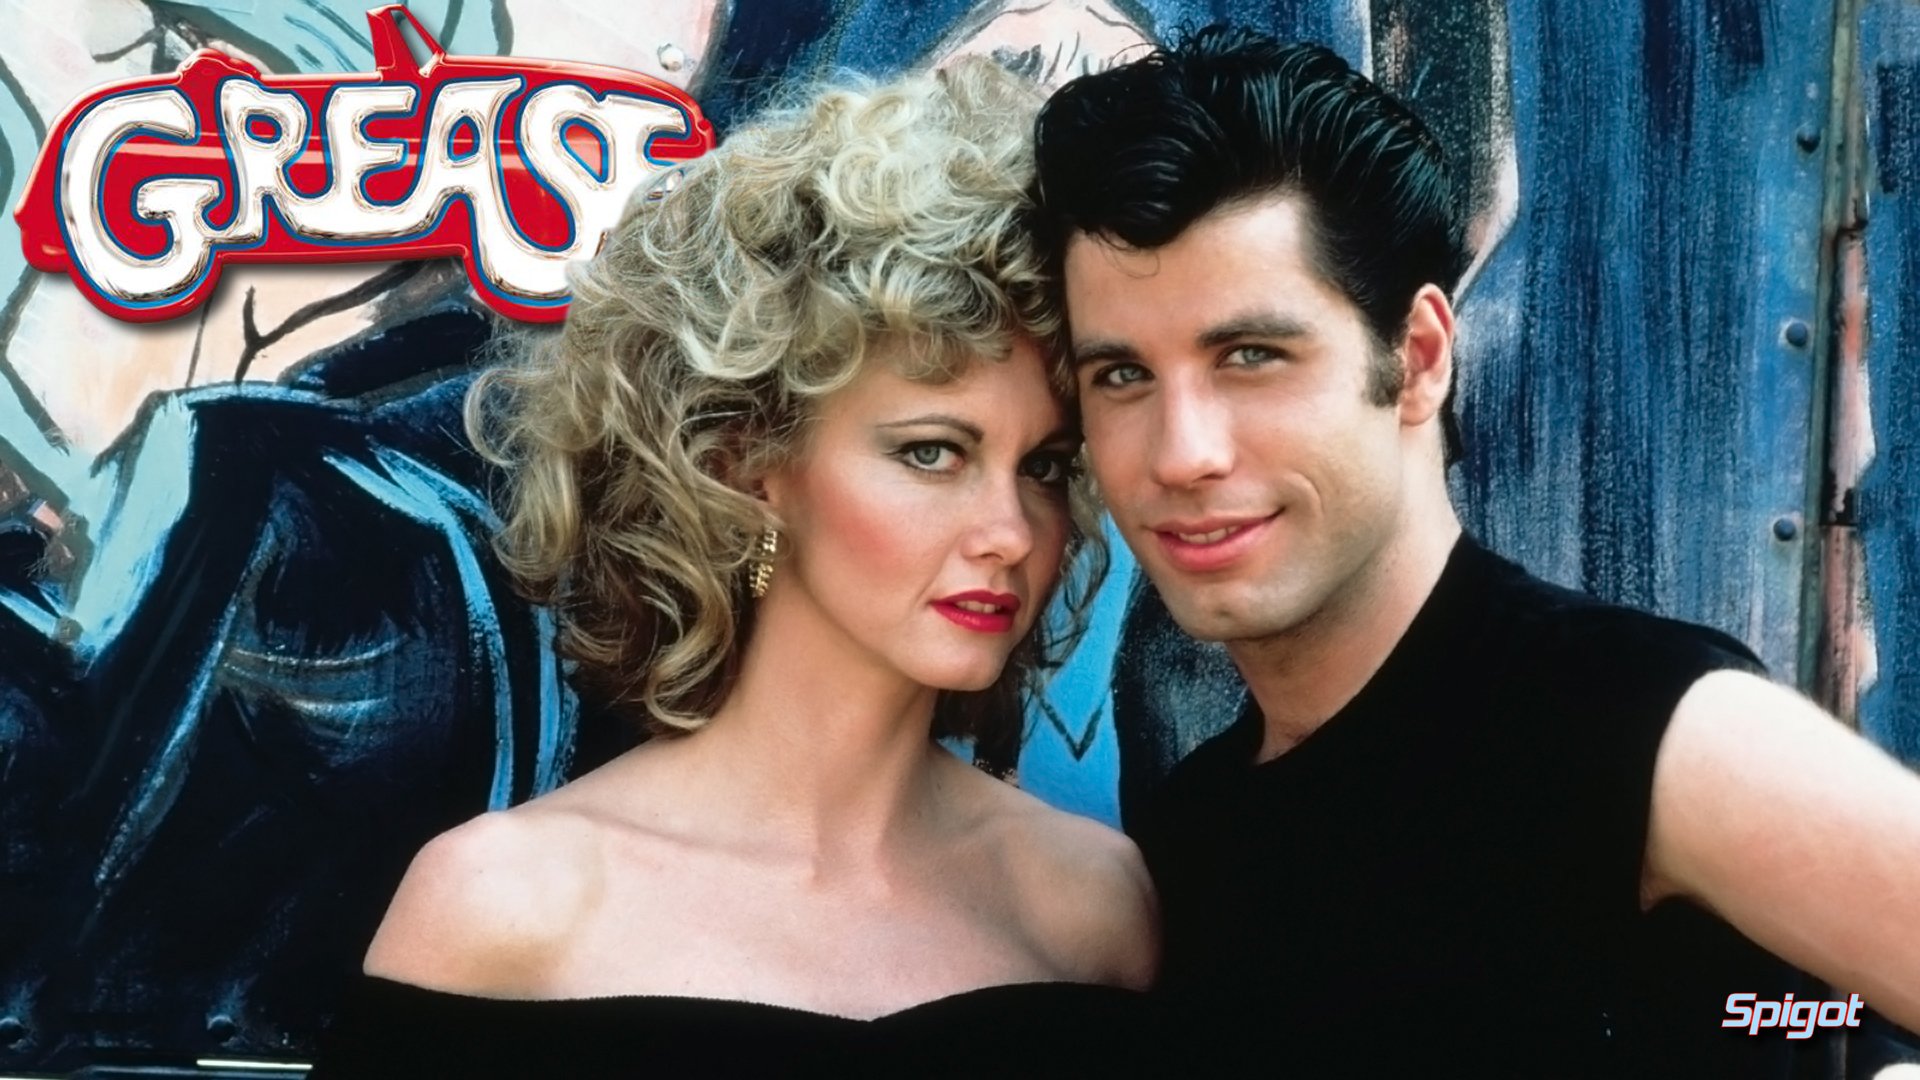 Grease Aesthetic Wallpaper  Grease musical Grease movie Grease aesthetic